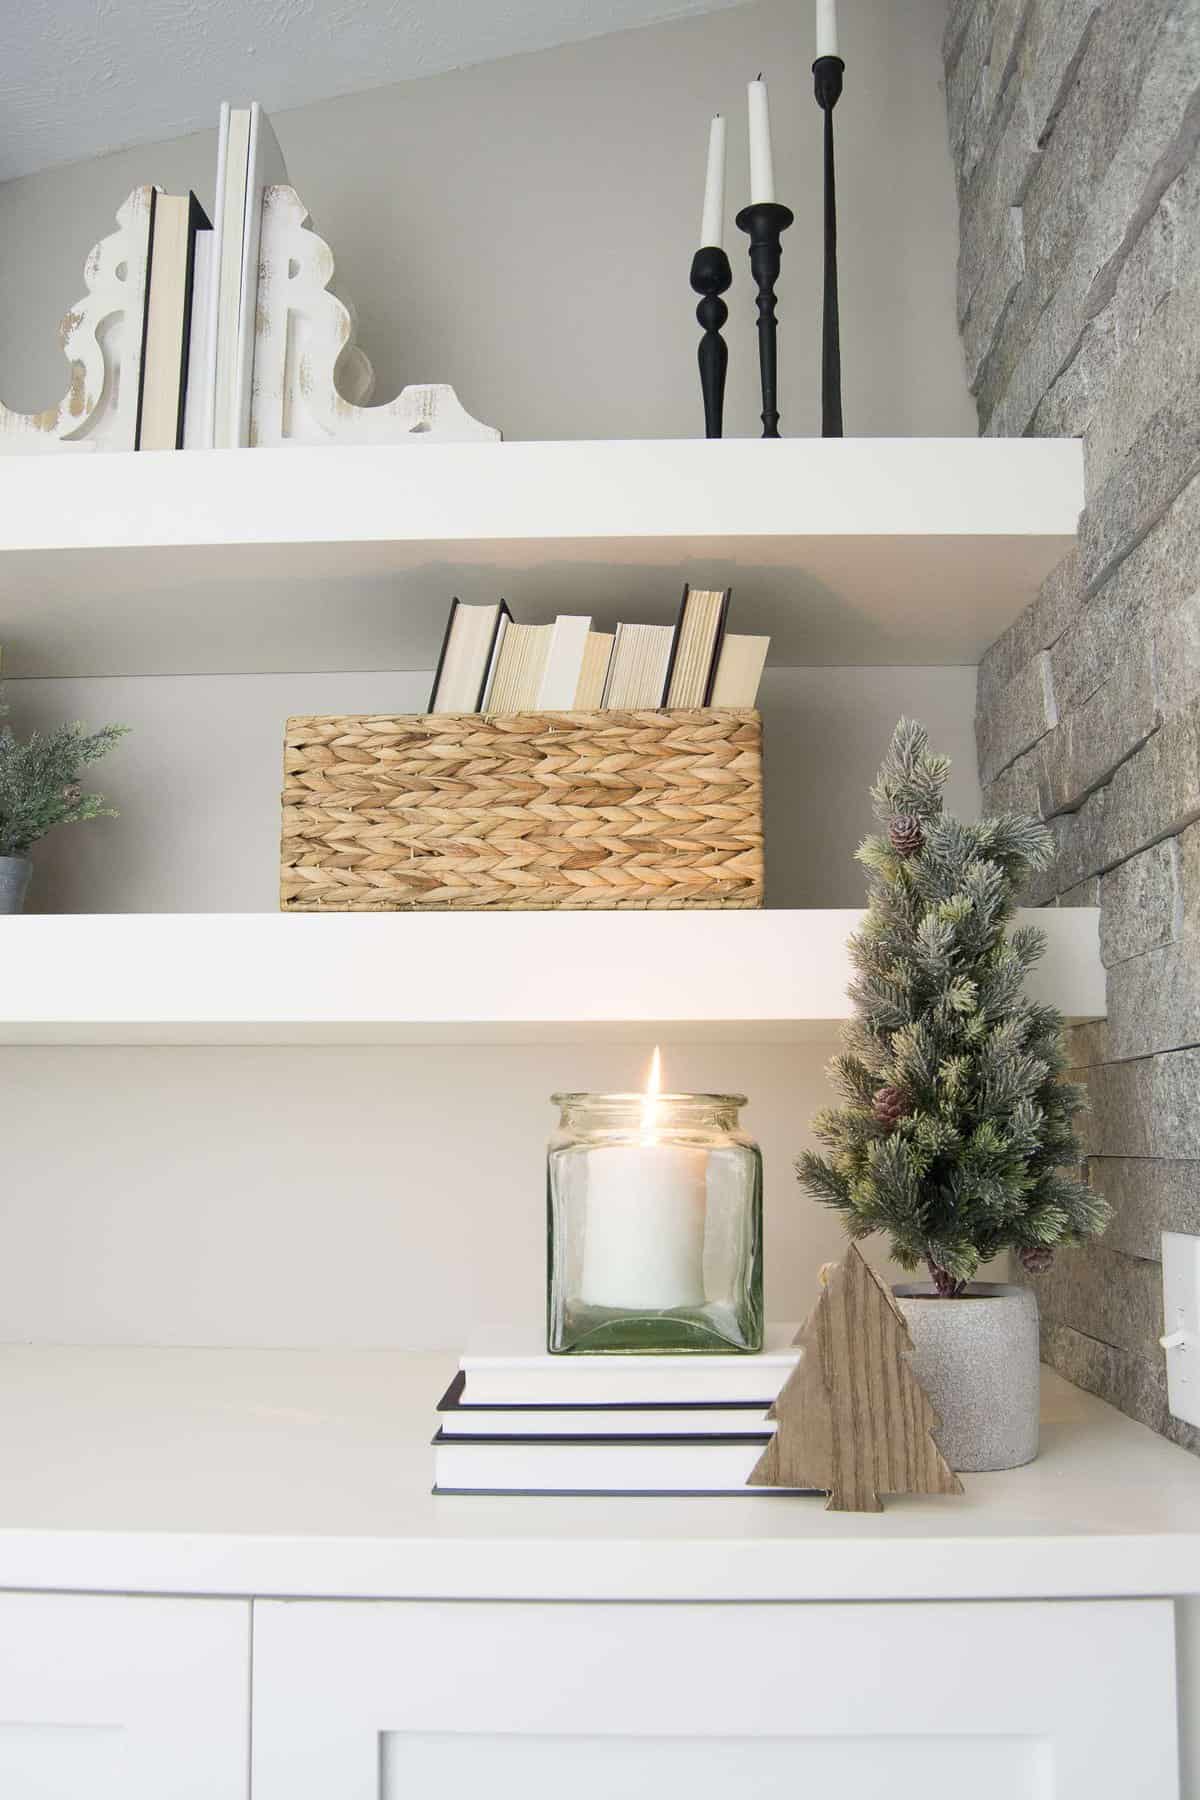 Do you want to make your book shelves look cohesive? I've got the simplest and easiest DIY book covers you've ever done up on the blog for you today.